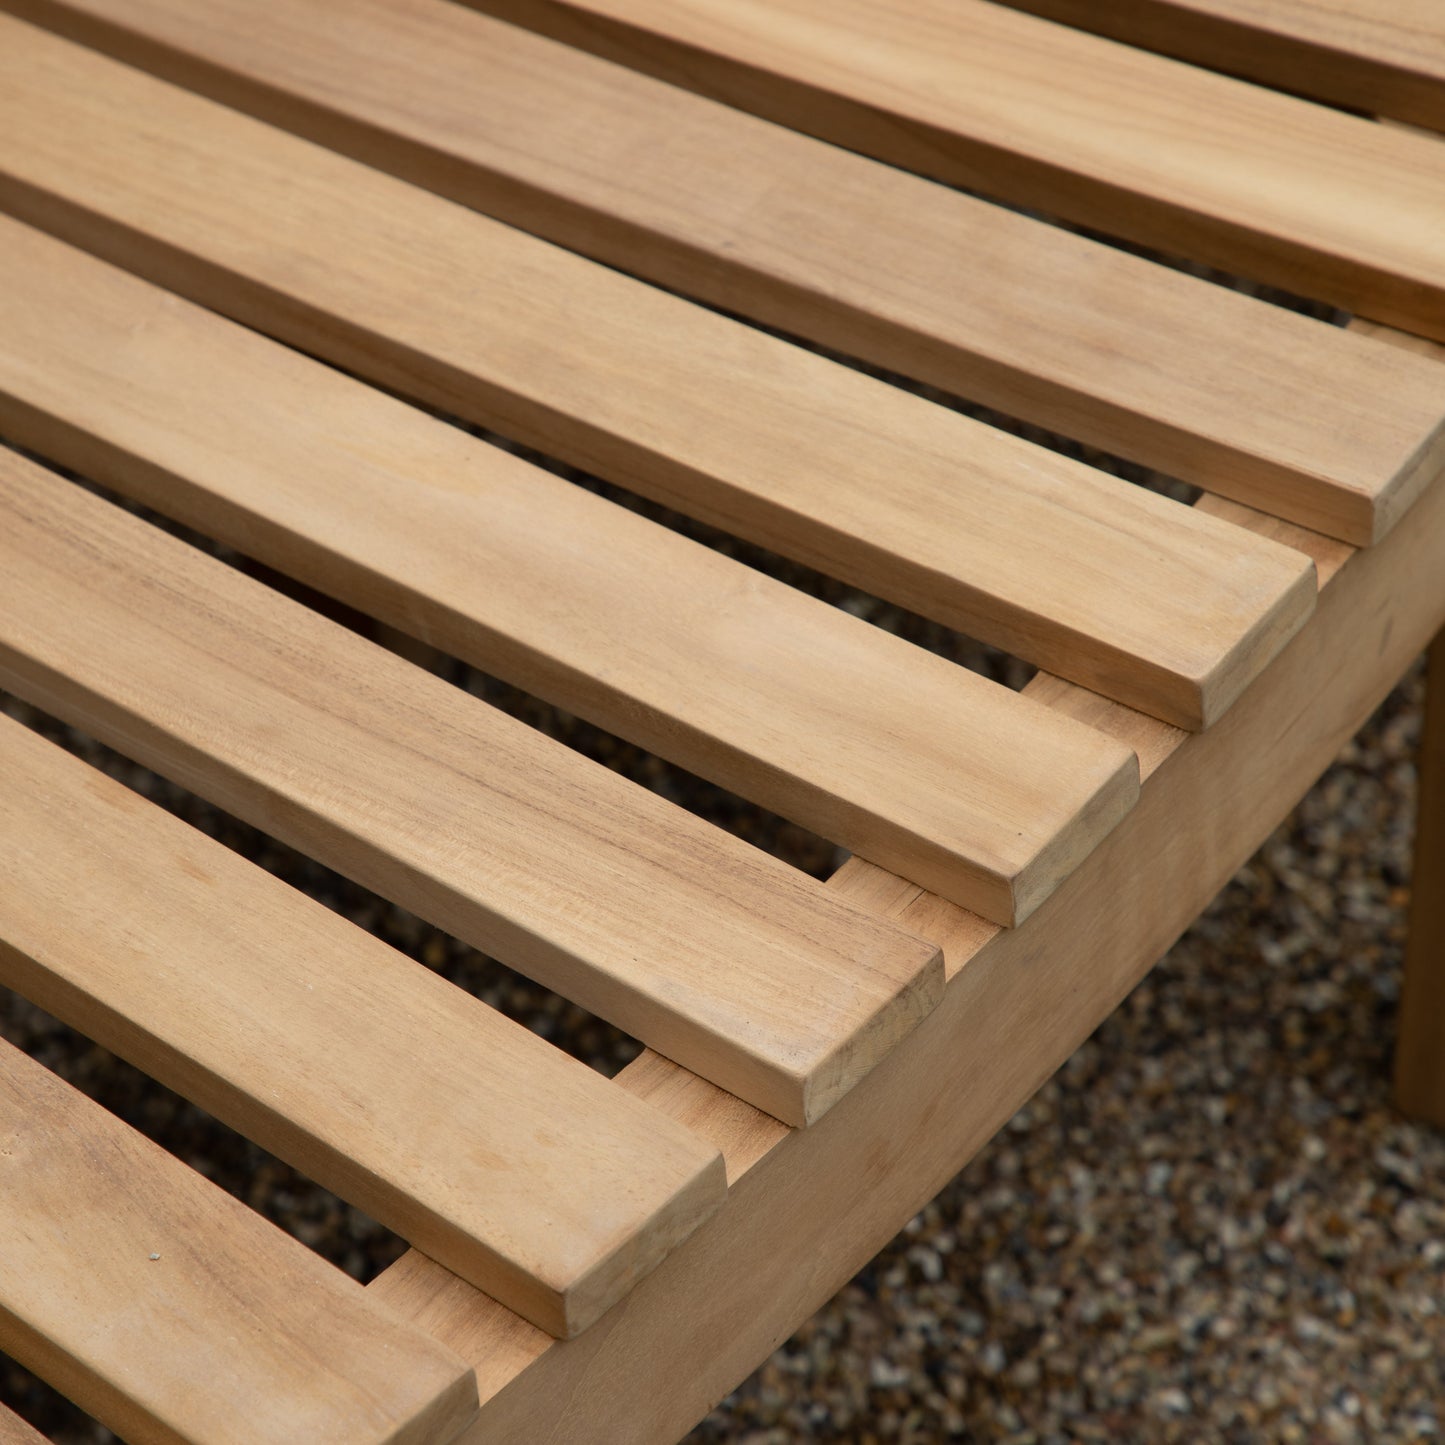 A stunning close up of the Ottery Bench with slats, perfect for home furniture and interior decor.